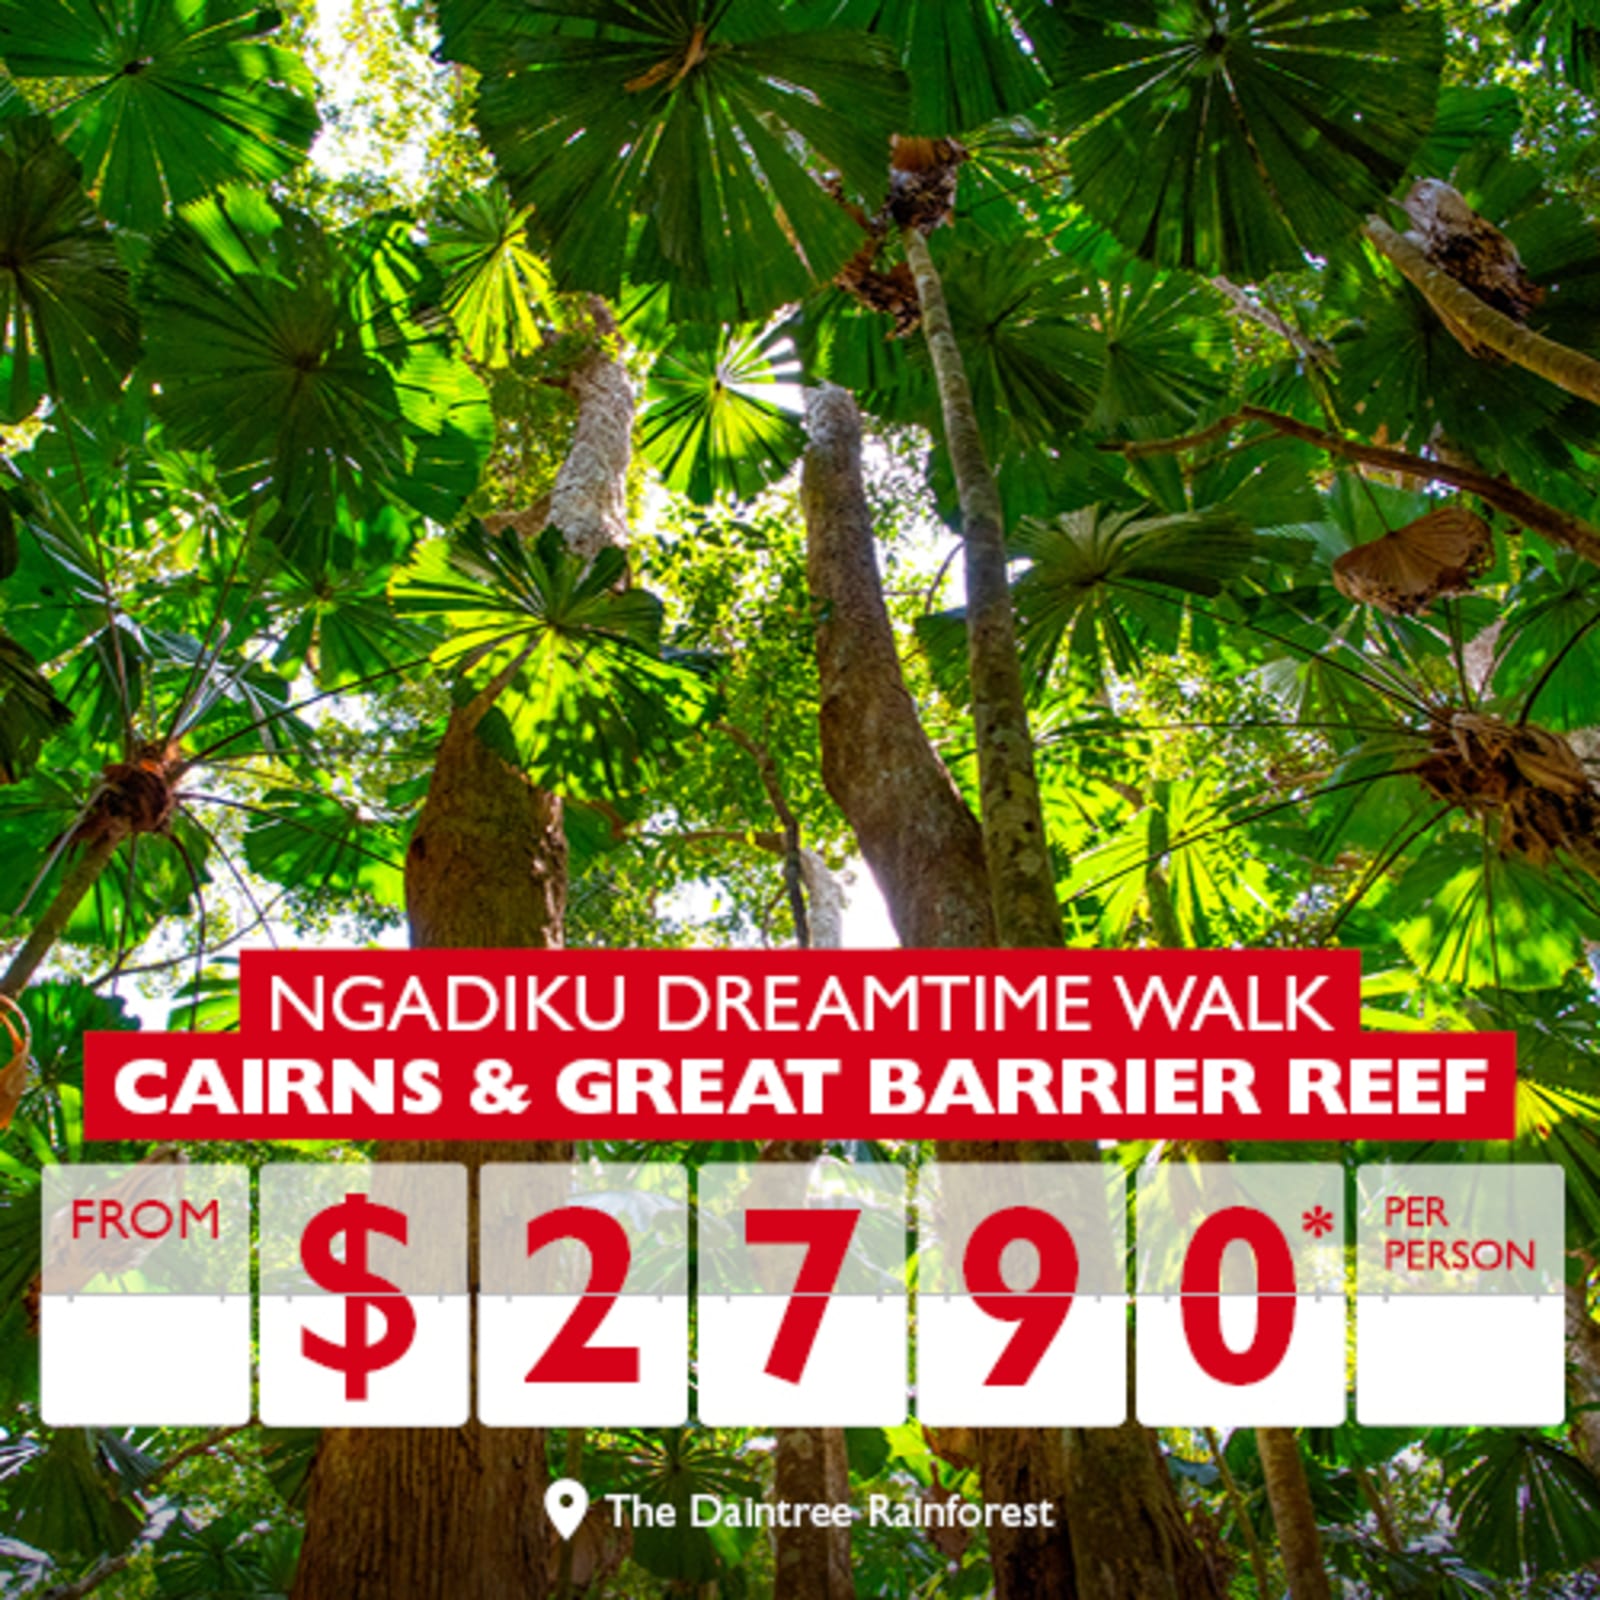 Ngadiku Dreamtime Walk | Cairns & Great Barrier Reef from $2790* per person